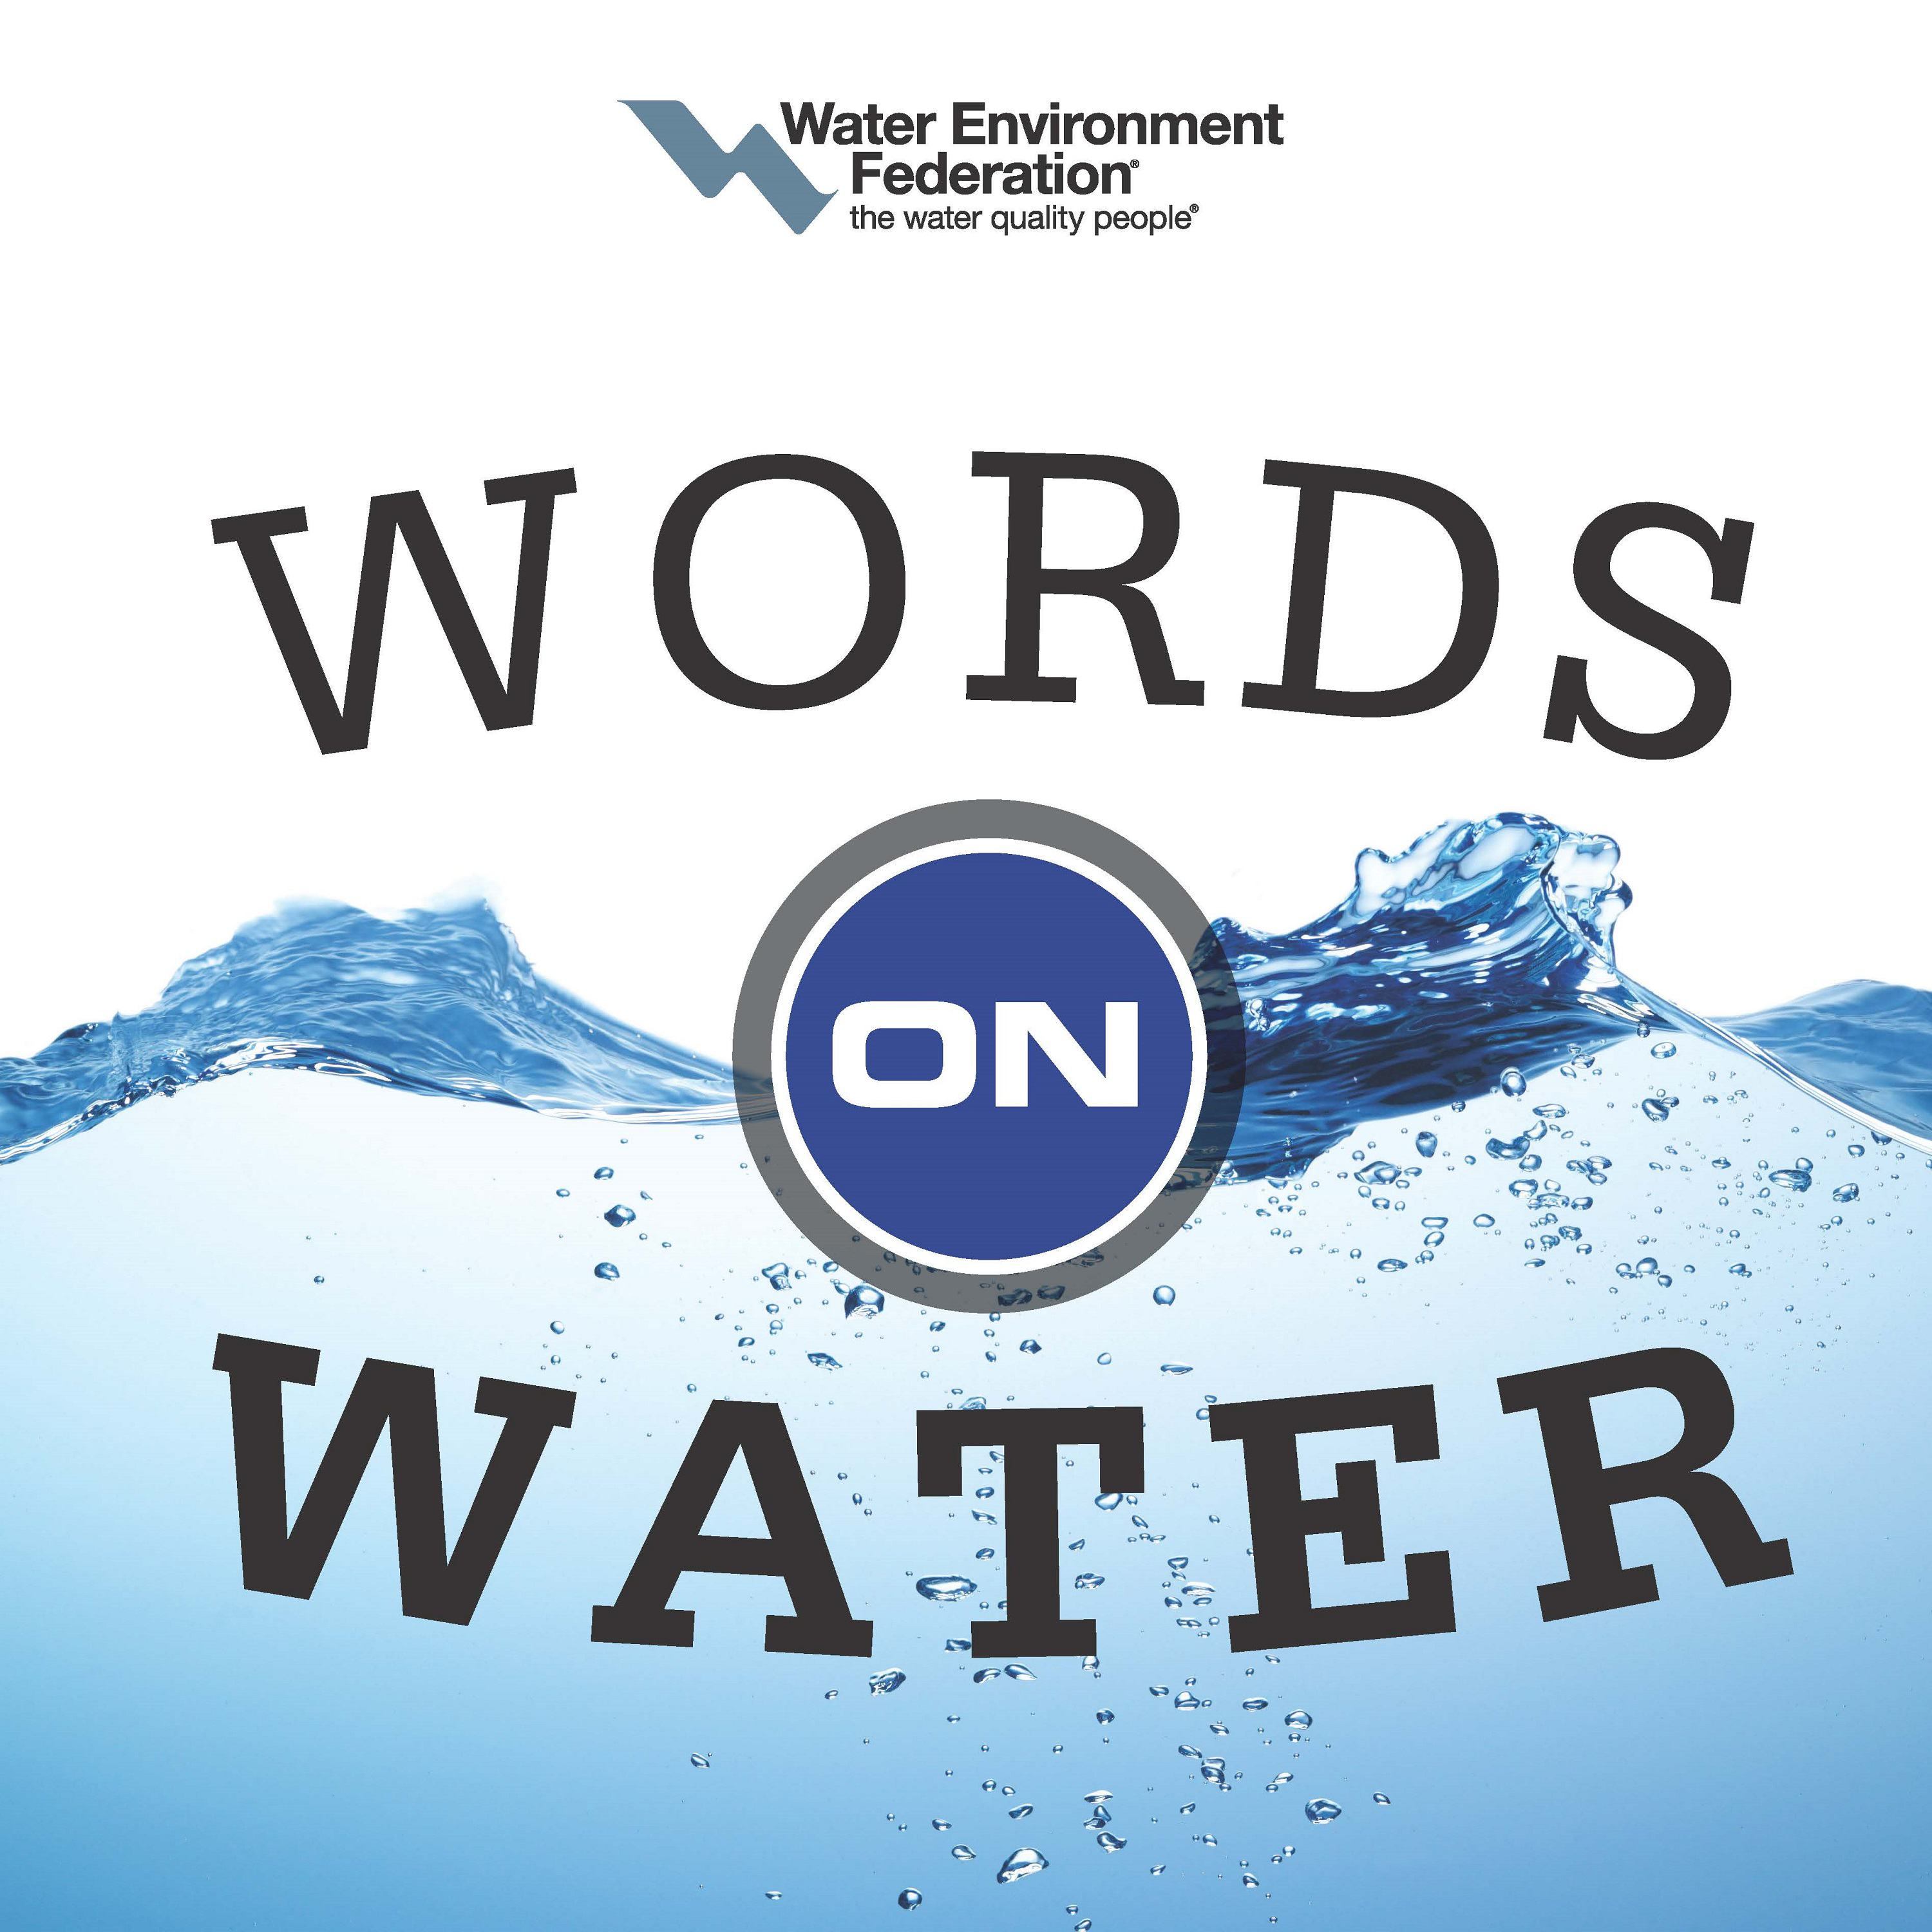 A highlight from Words On Water #198: Jaime Eichenberger on His Journey to WEF President